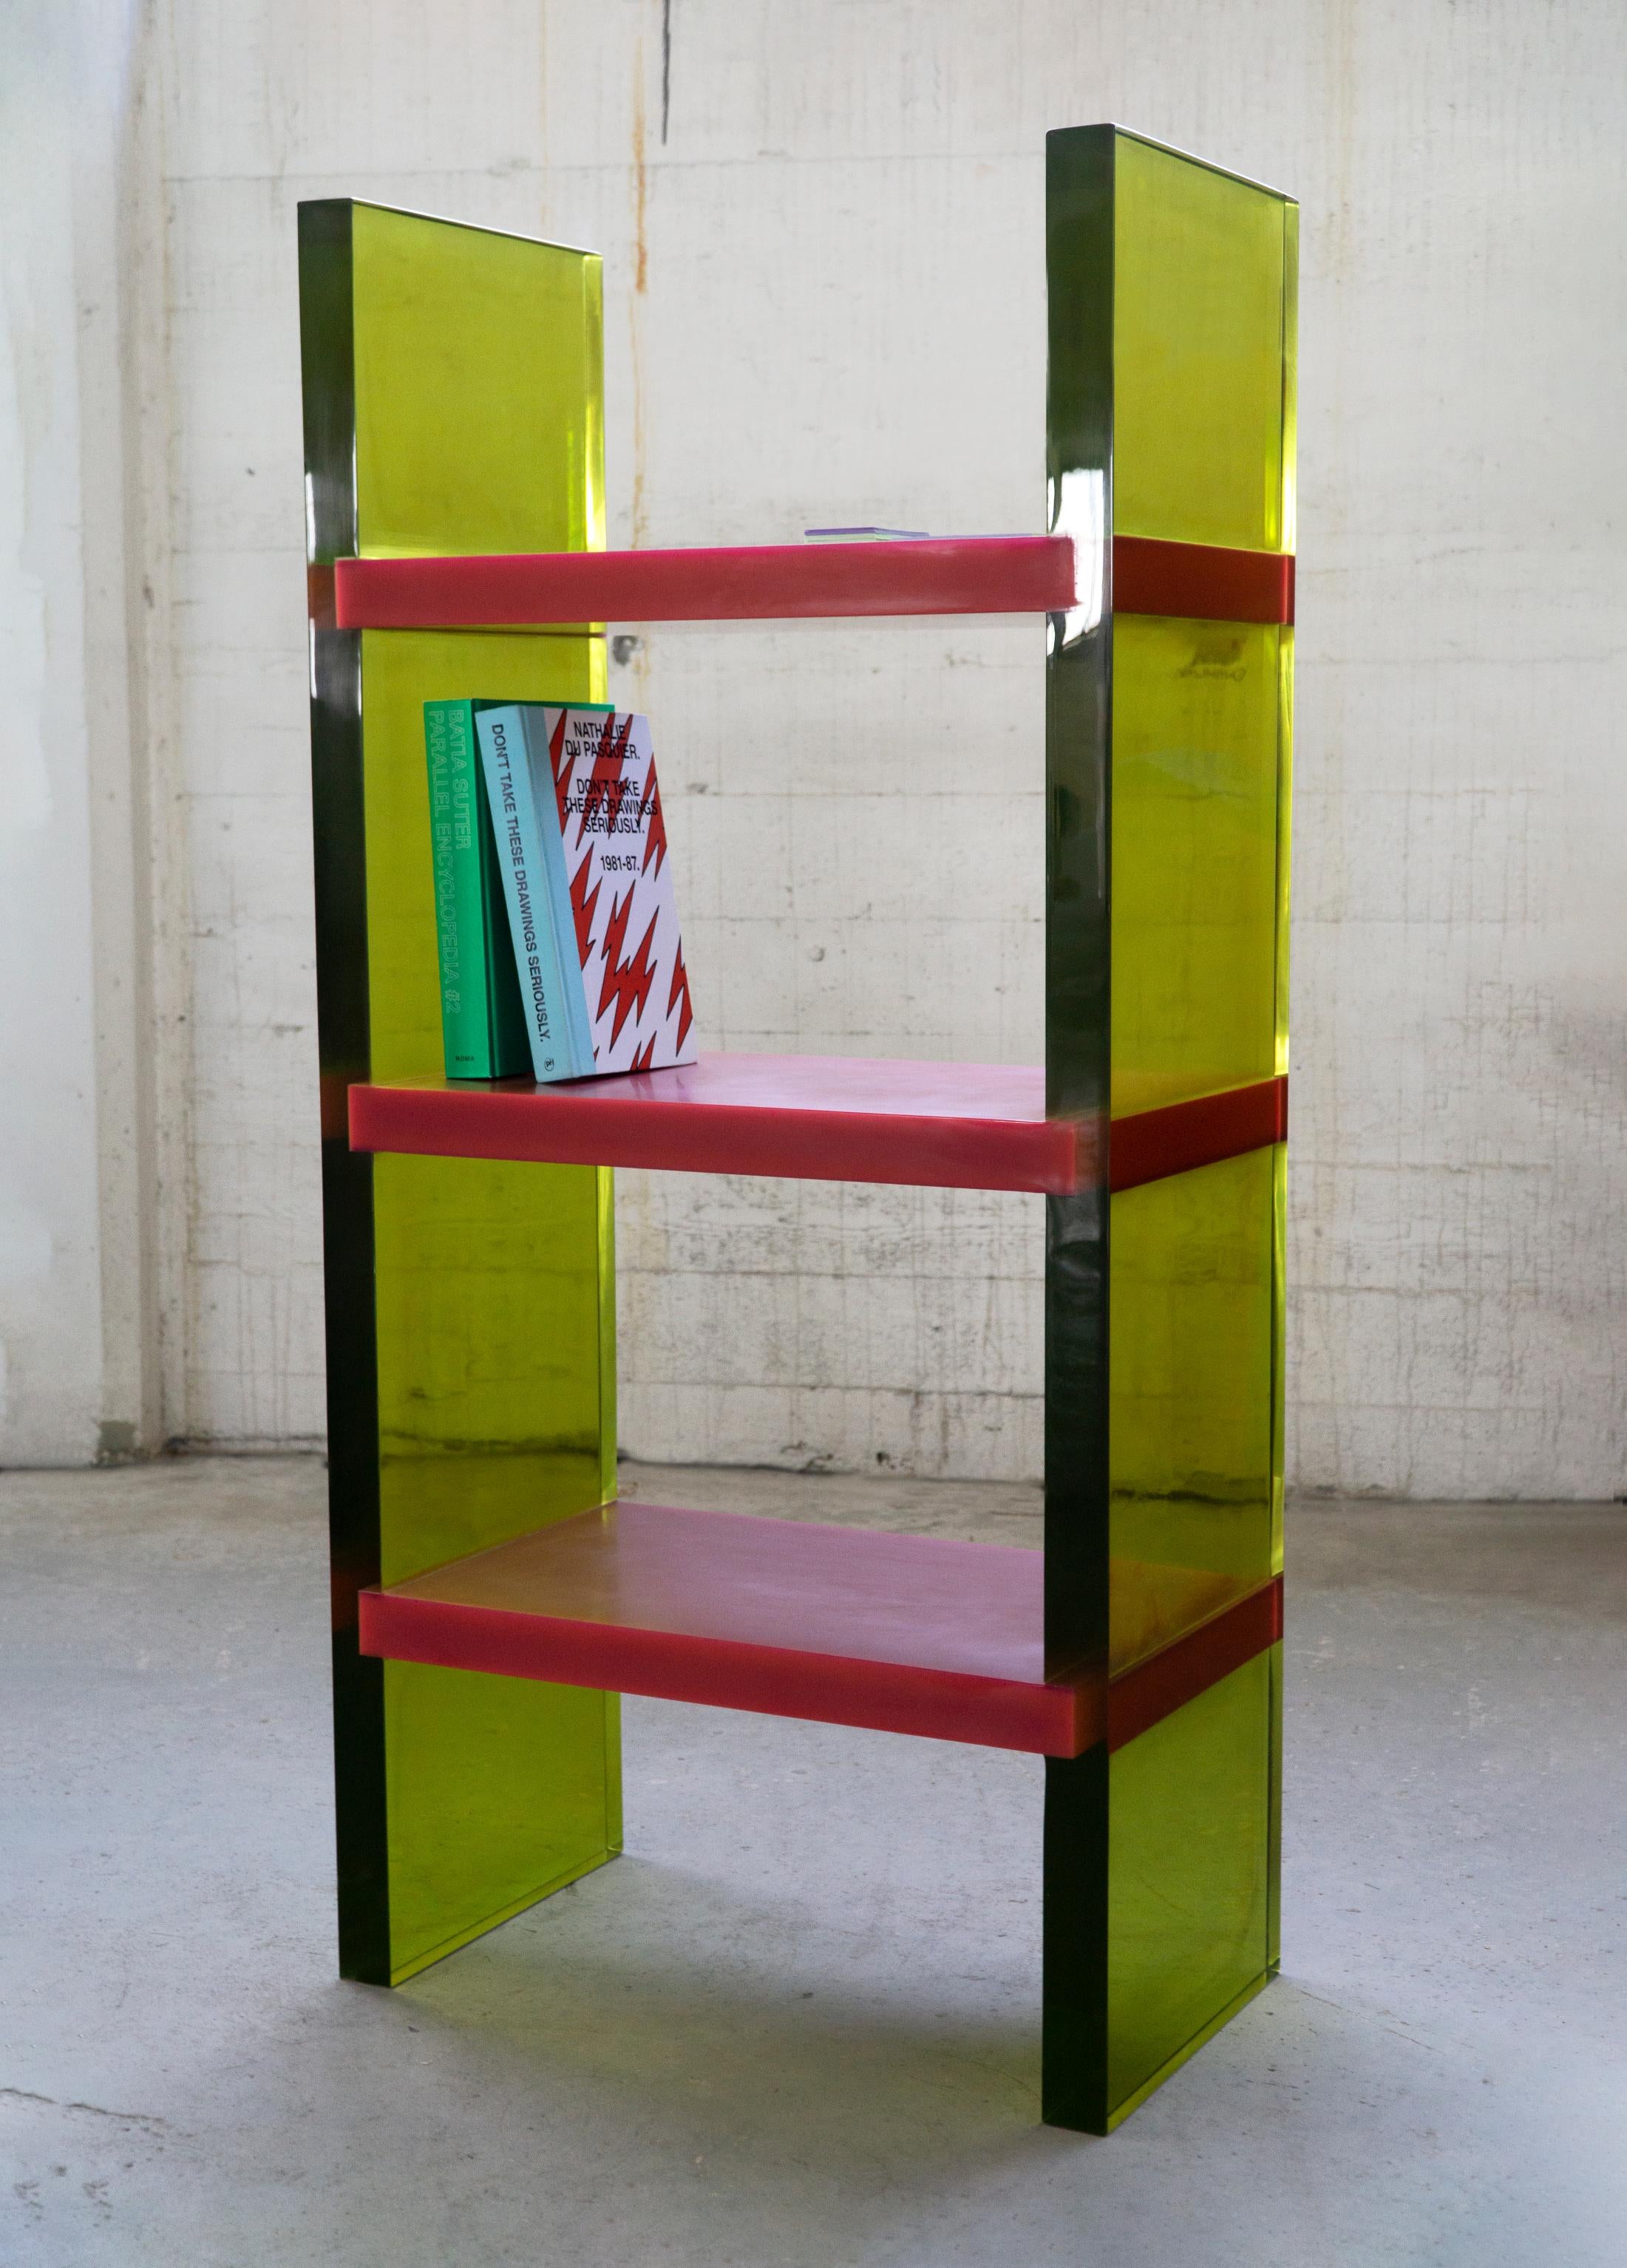 Differ Shelf by Lisa Brustolin
Dimensions: W 66 x D 44 x H 134 cm
Materials: Epoxy Resin

Differ Shelf is a bookshelf featured by high contrasts, the horizontality and verticality of the lines, the transparency of the epoxy resin for the legs while